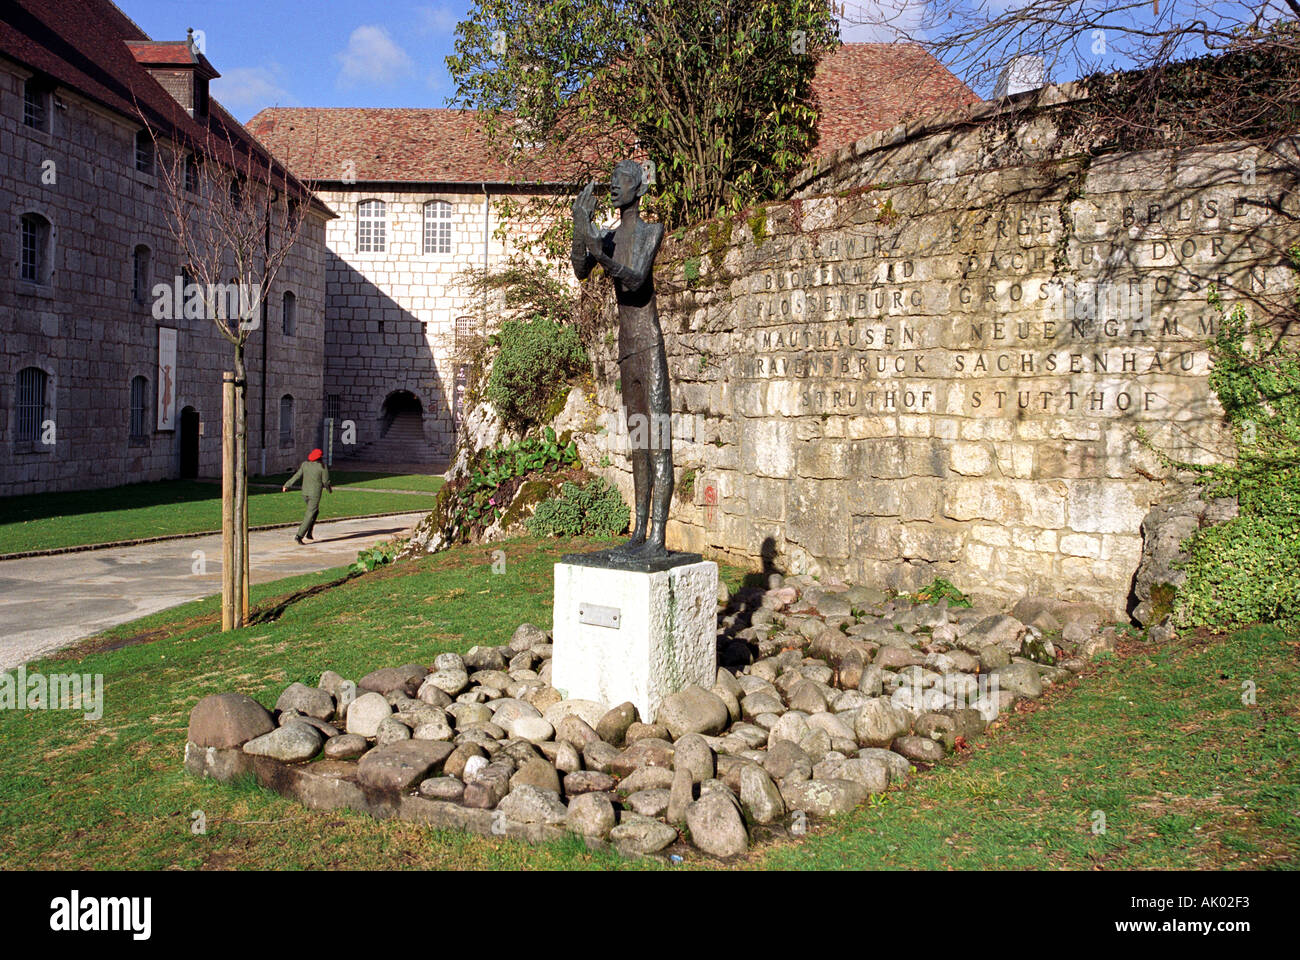 Memorial to the Holocaust at La Citadelle de Besancon or The Citadel of Besancon in the French comte region of France Stock Photo